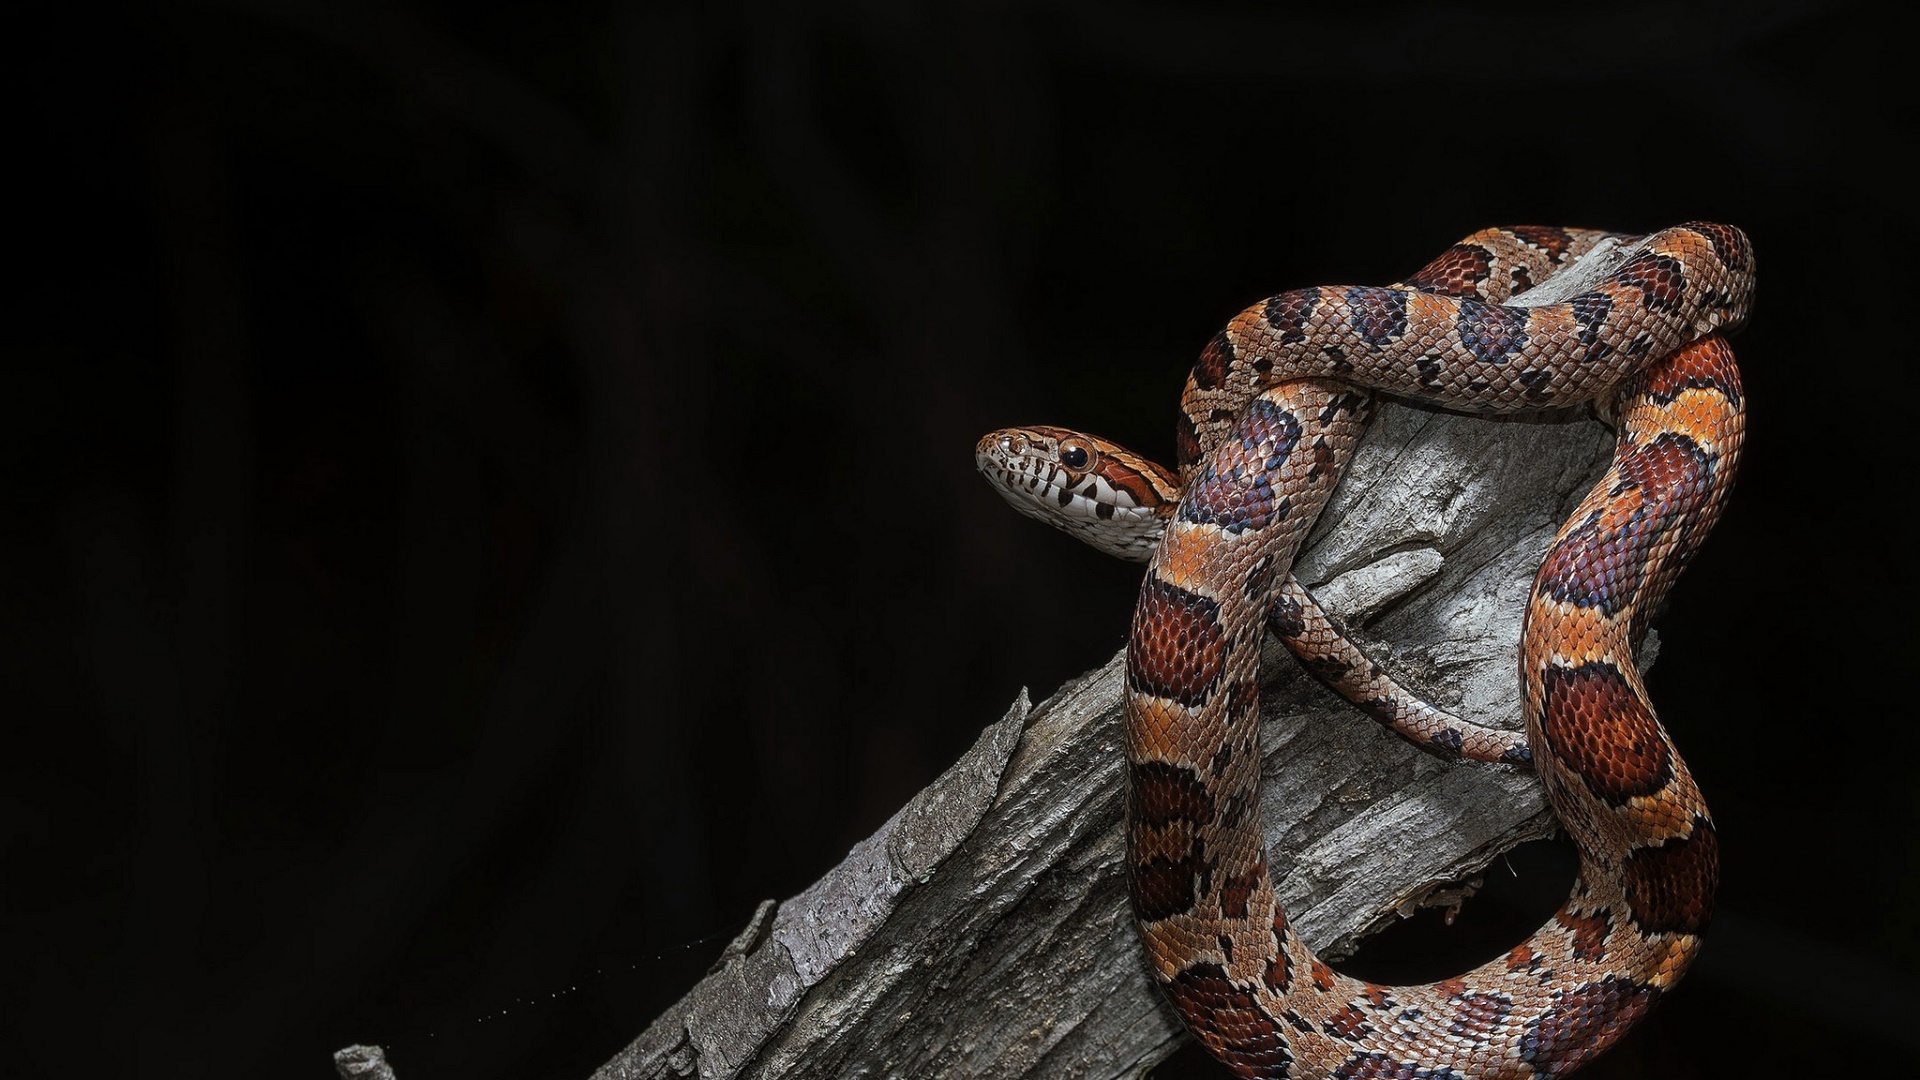 General 1920x1080 snake animals reptiles